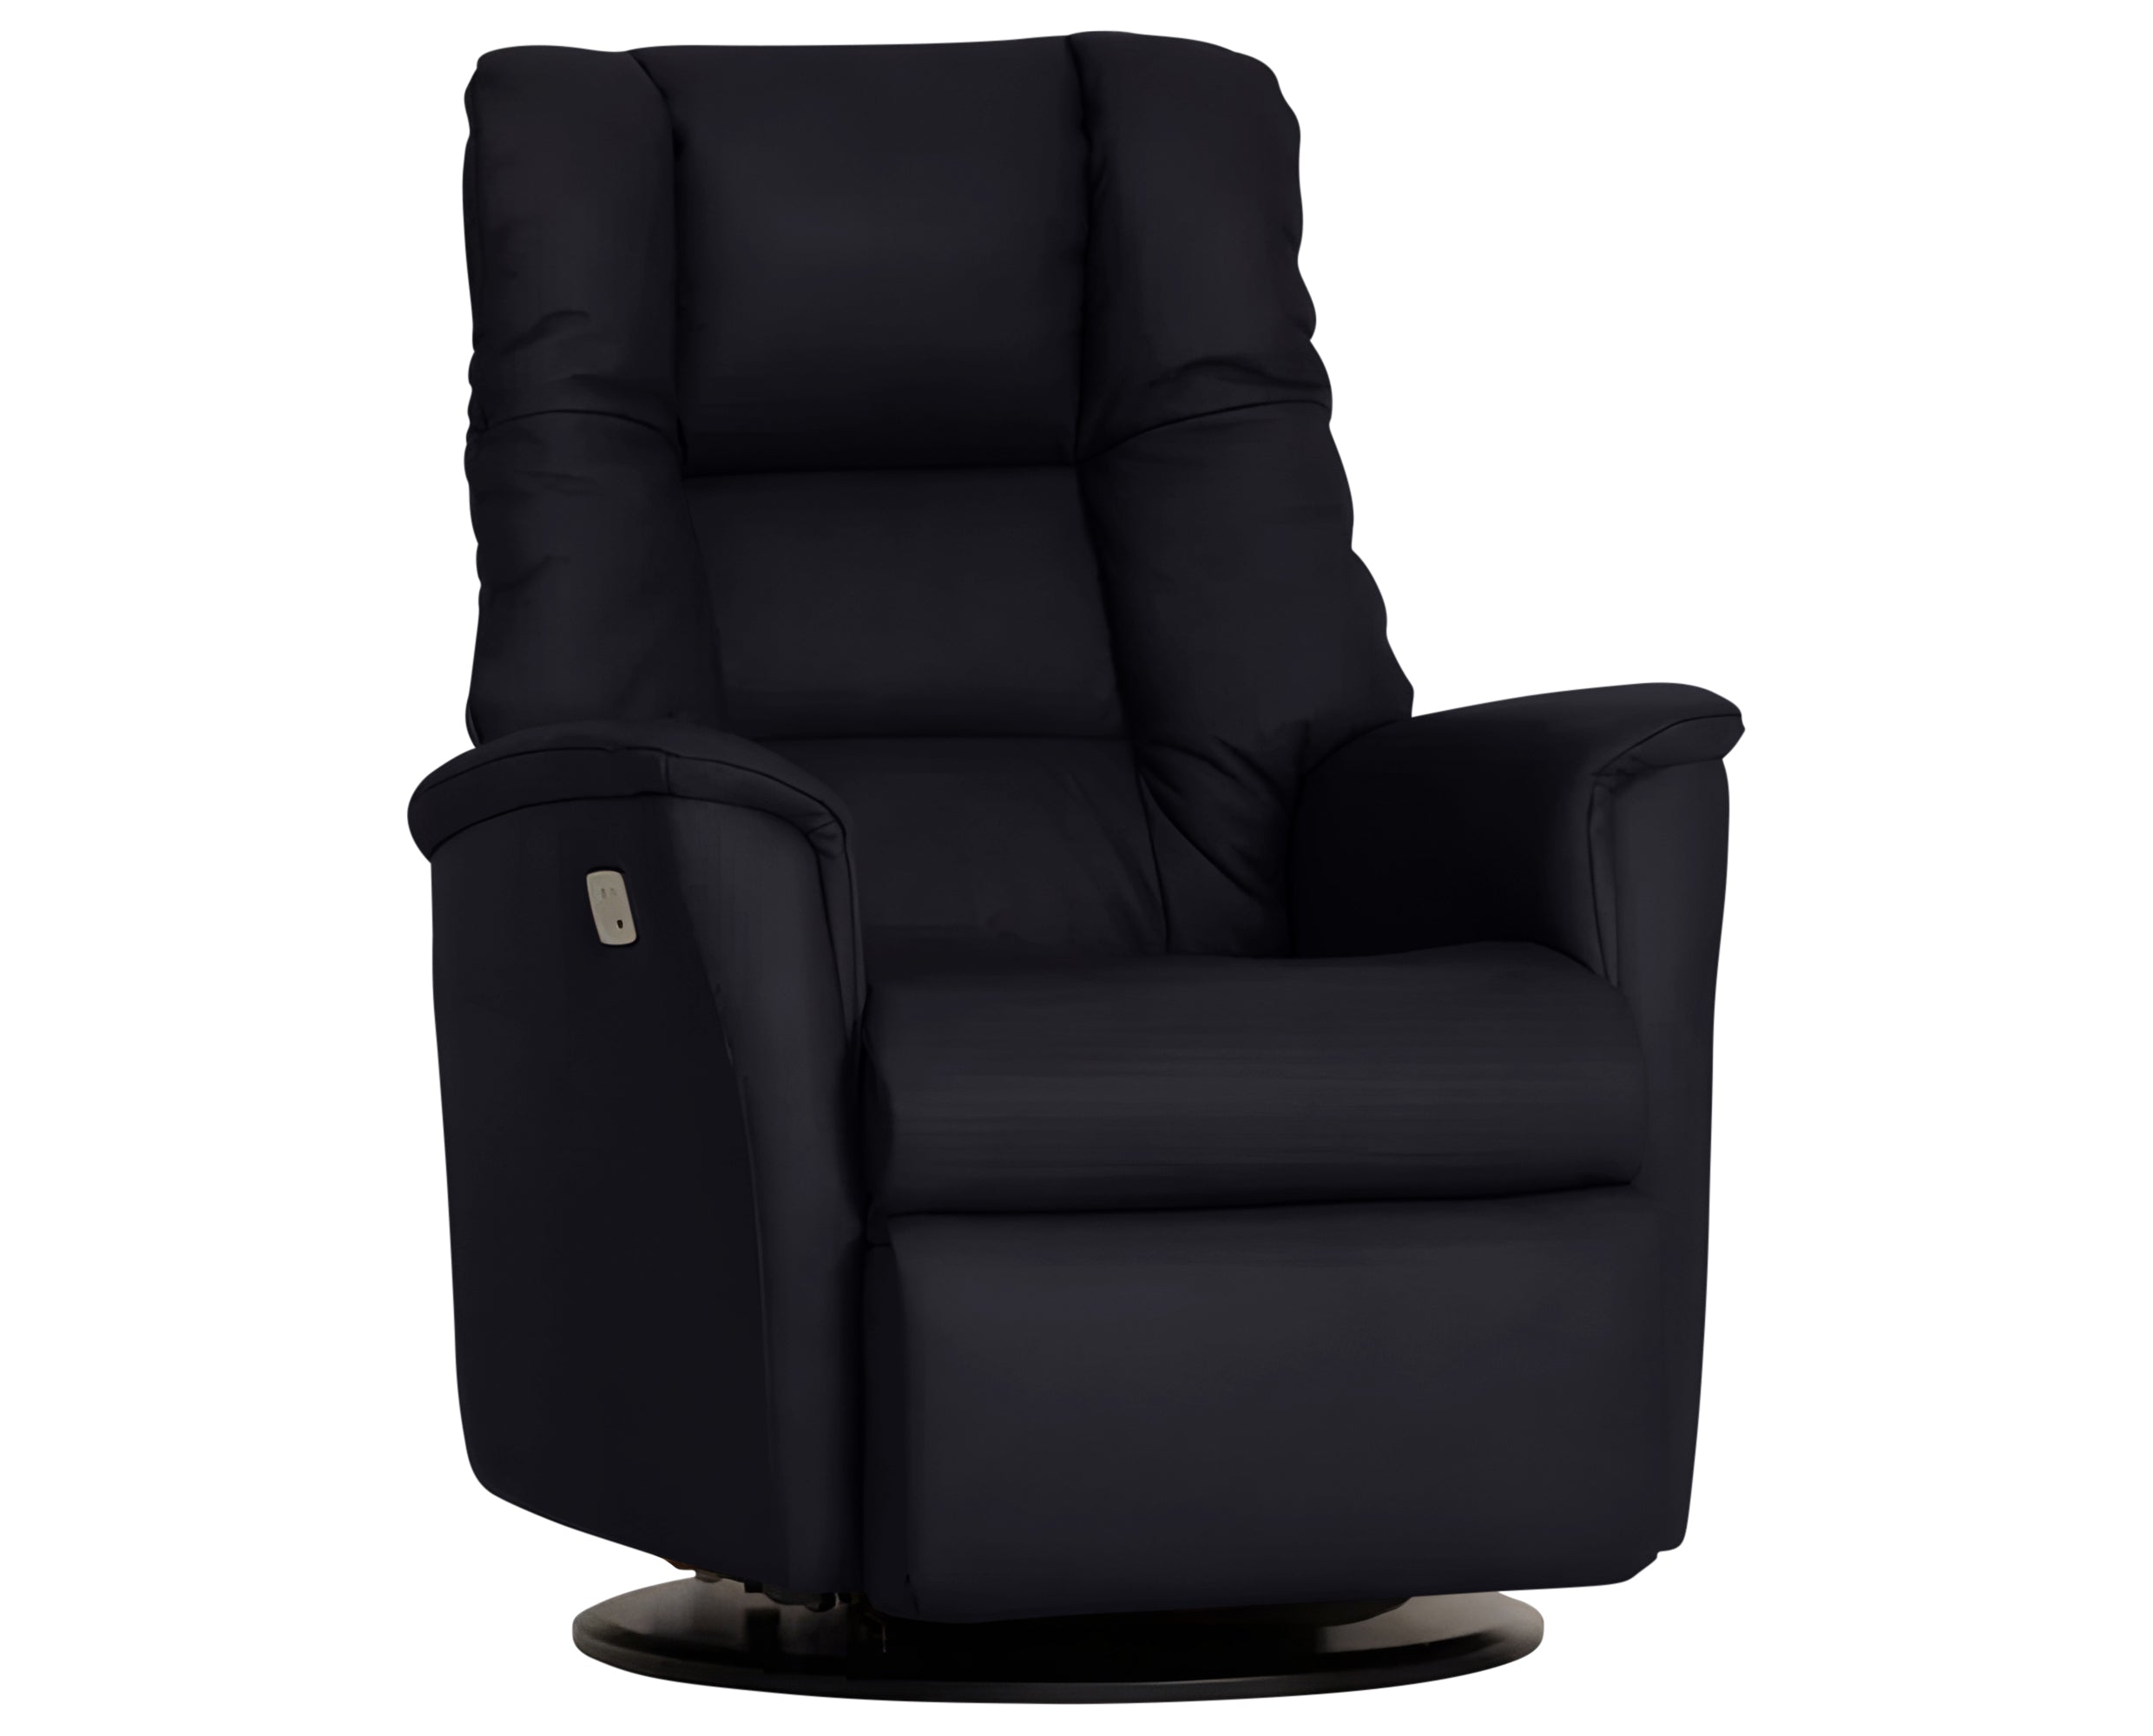 Sauvage Leather Charcoal L | Norwegian Comfort Victor Recliner - Promo | Valley Ridge Furniture